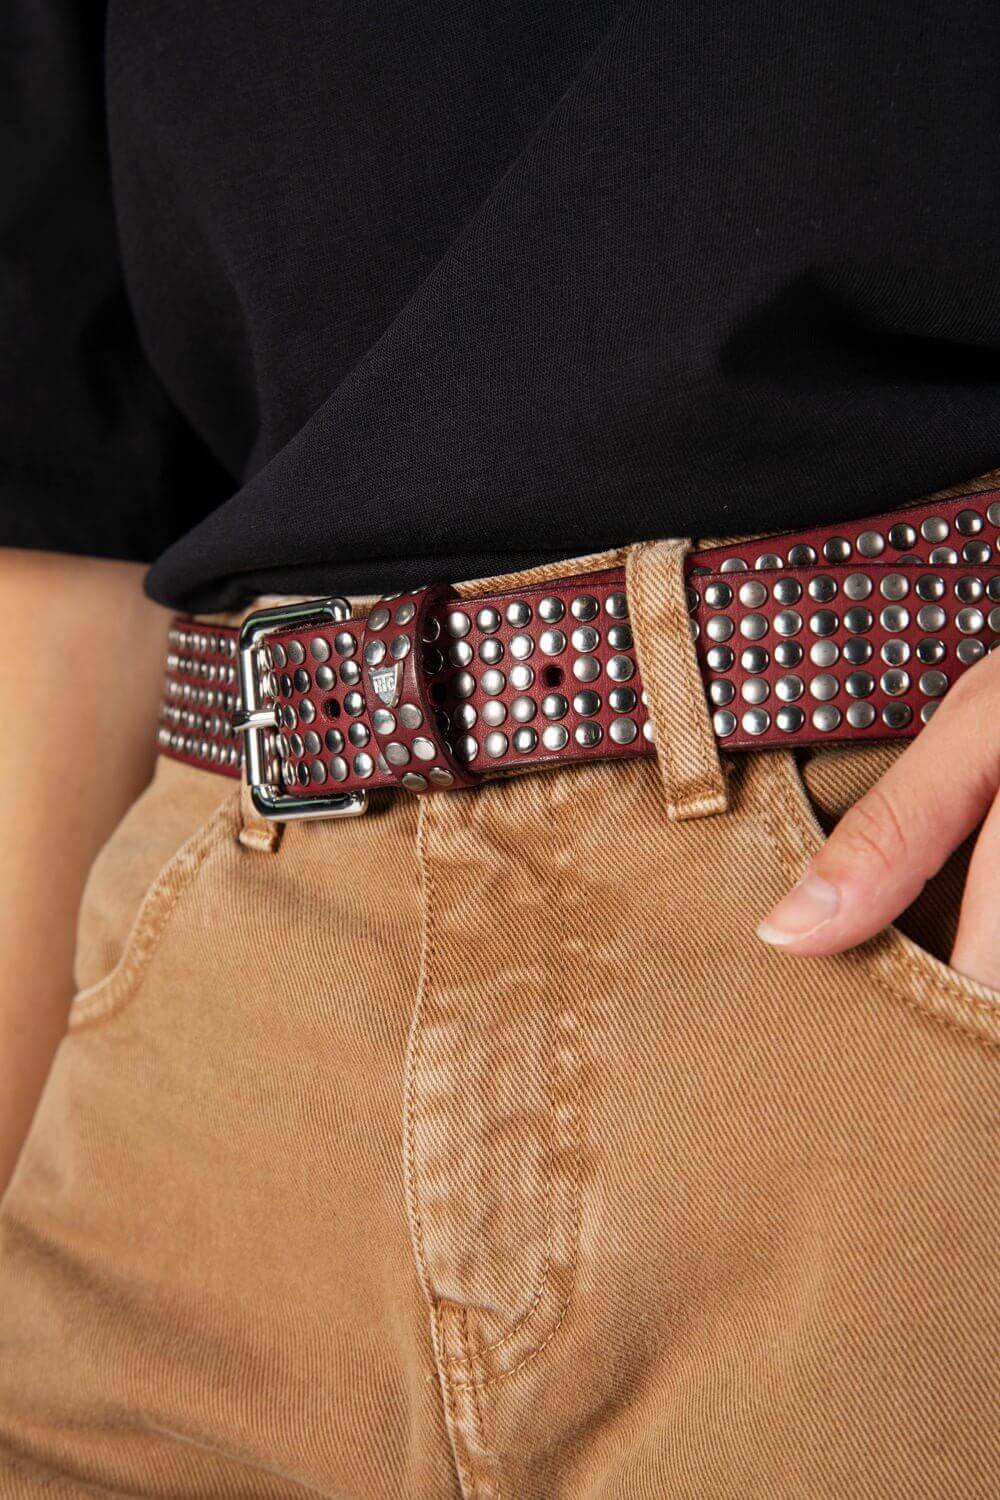 5.000 STUDS COLOR BELT Leather belt with mixed studs, brass buckle, studded loop and rivet with engraved logo. Made in Italy, 3.5 cm height. HTC LOS ANGELES